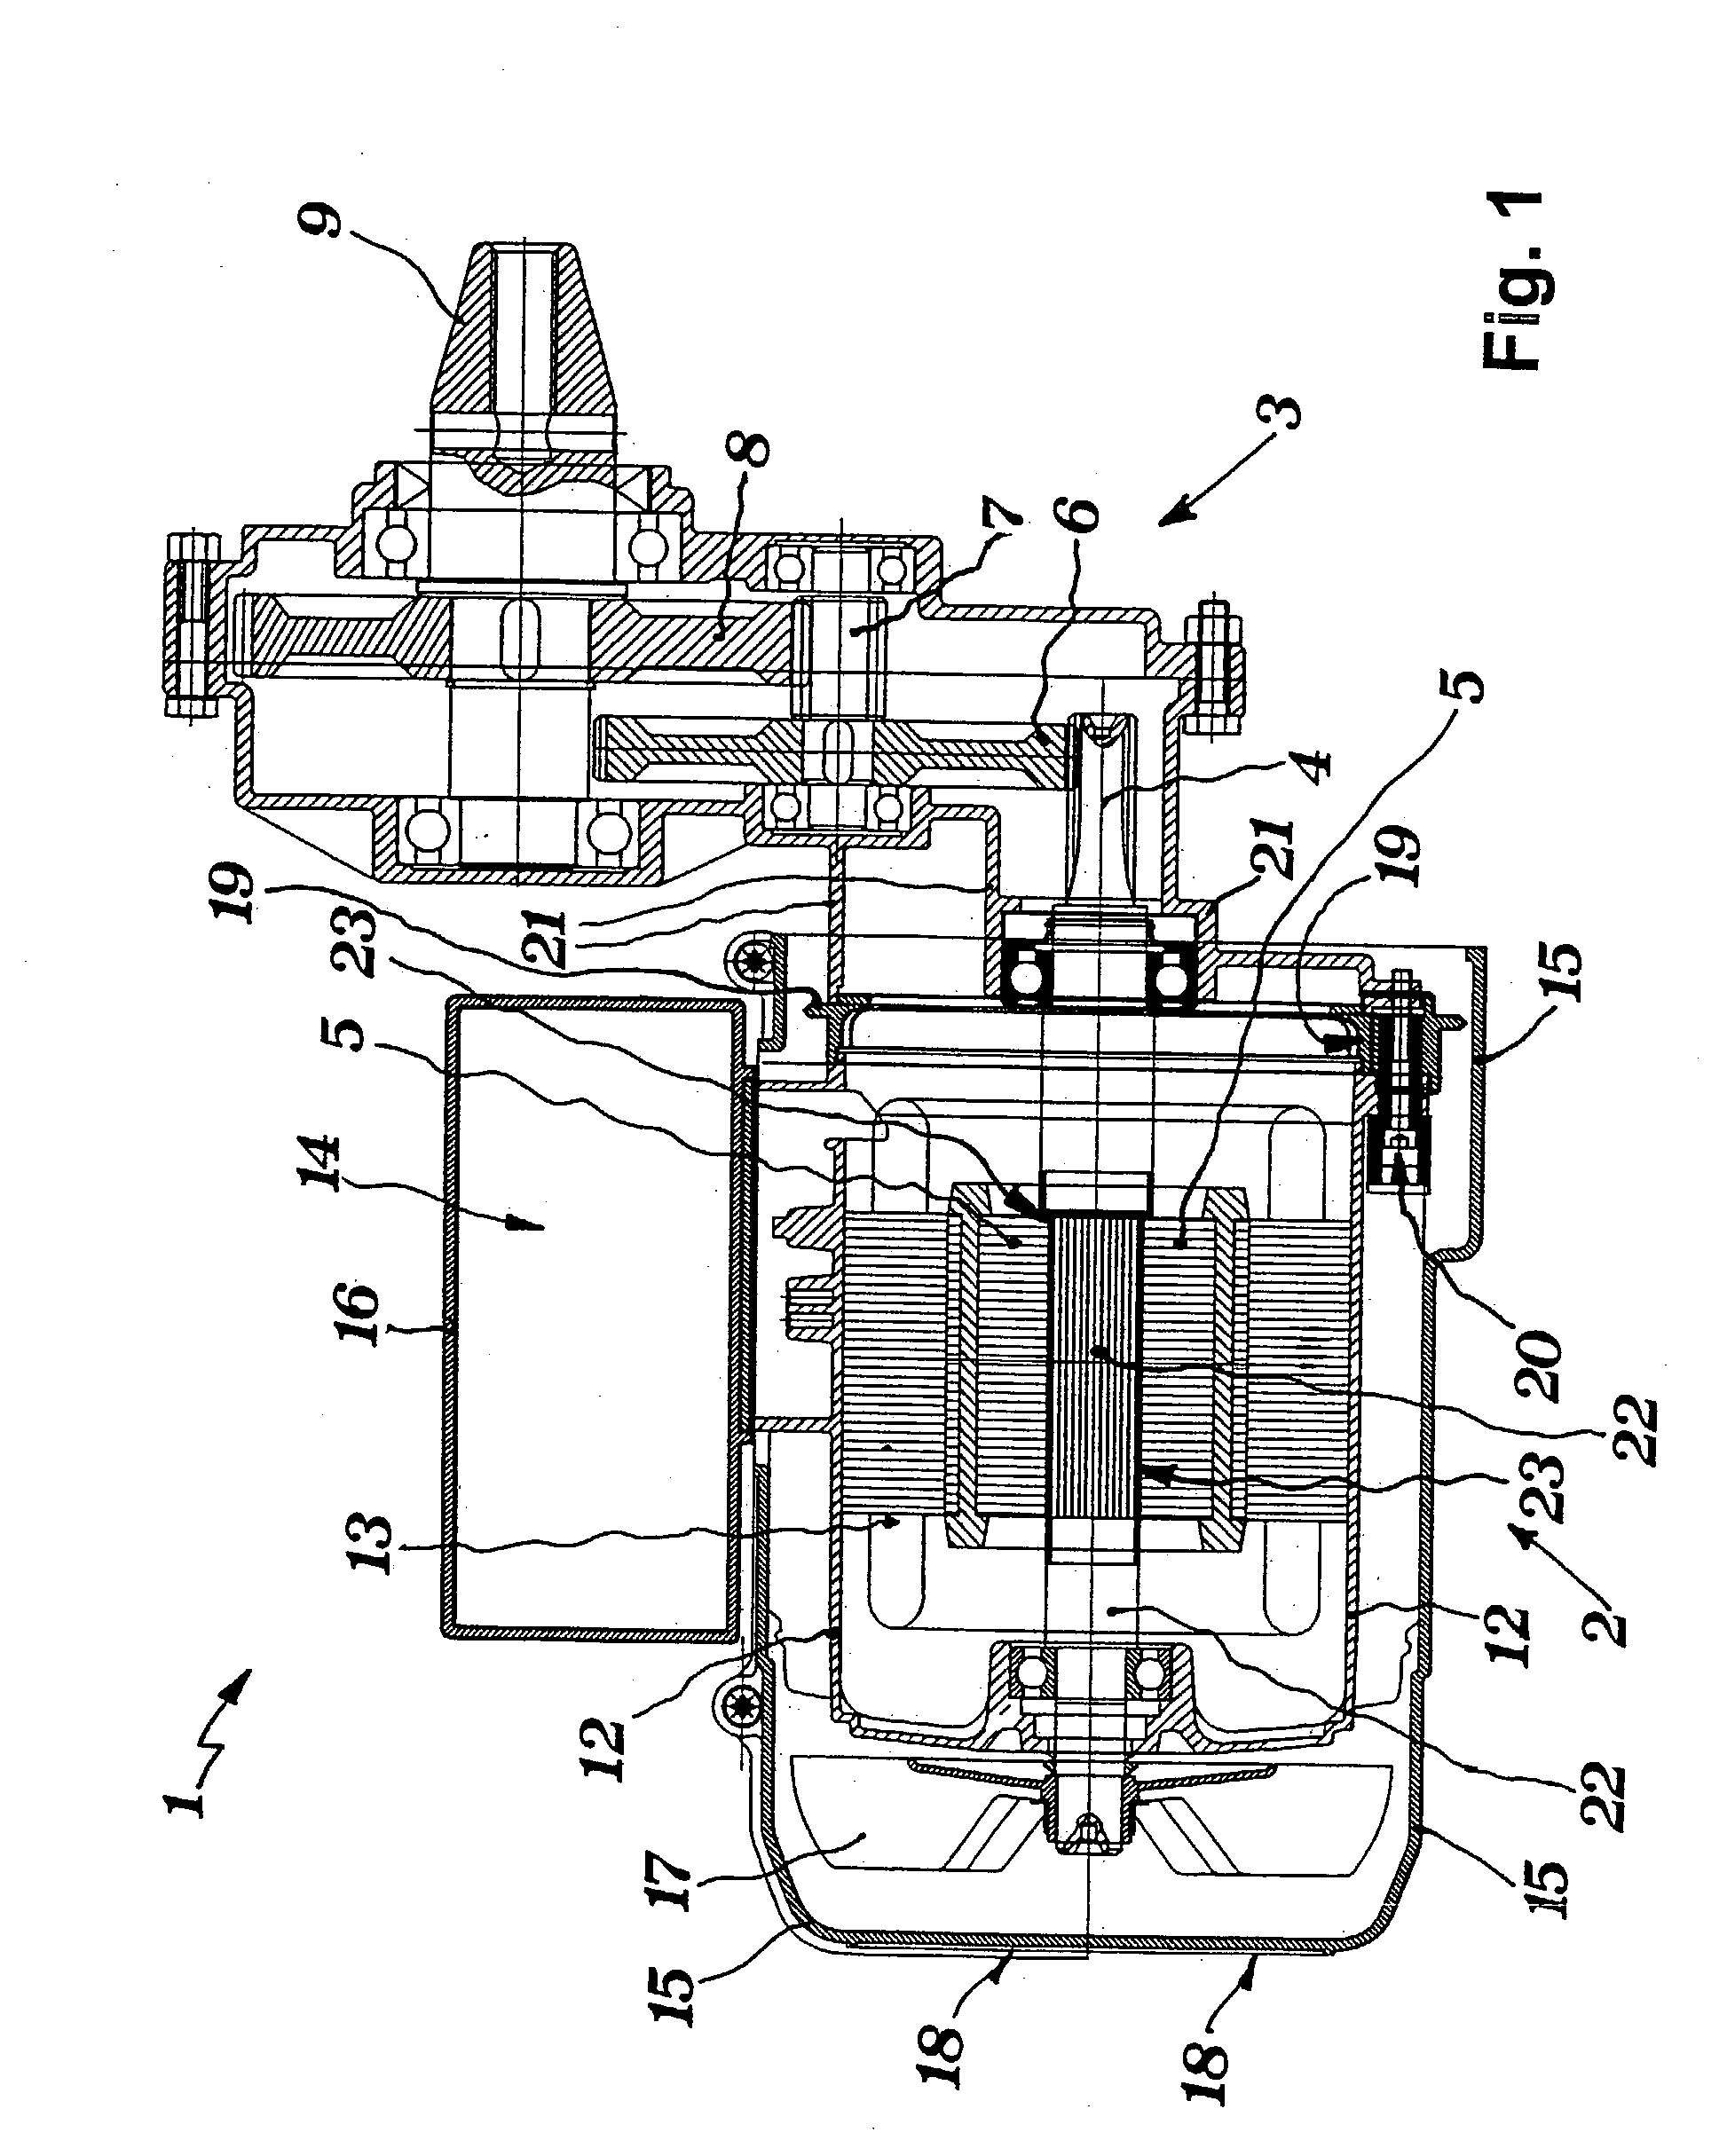 Mixer/stirrer with motor and reducer having insulating shell around motor and closed by insulating connection flange interposed between the motor and the reducer